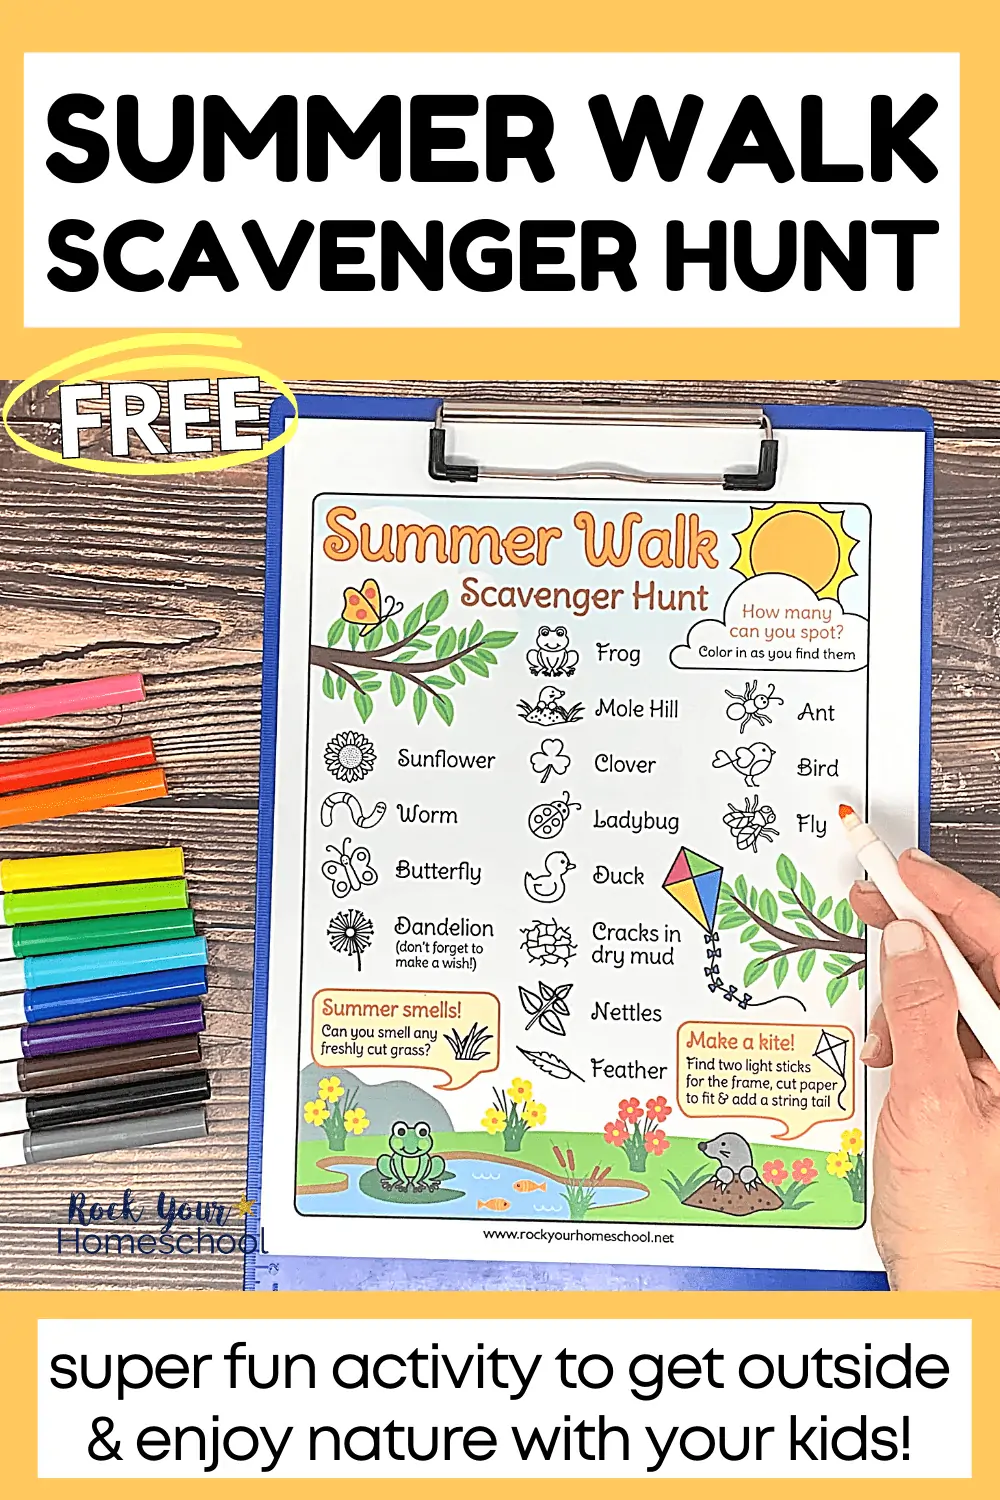 Summer Walk Scavenger Hunt for Kids: Free Printable for Special Fun Activity